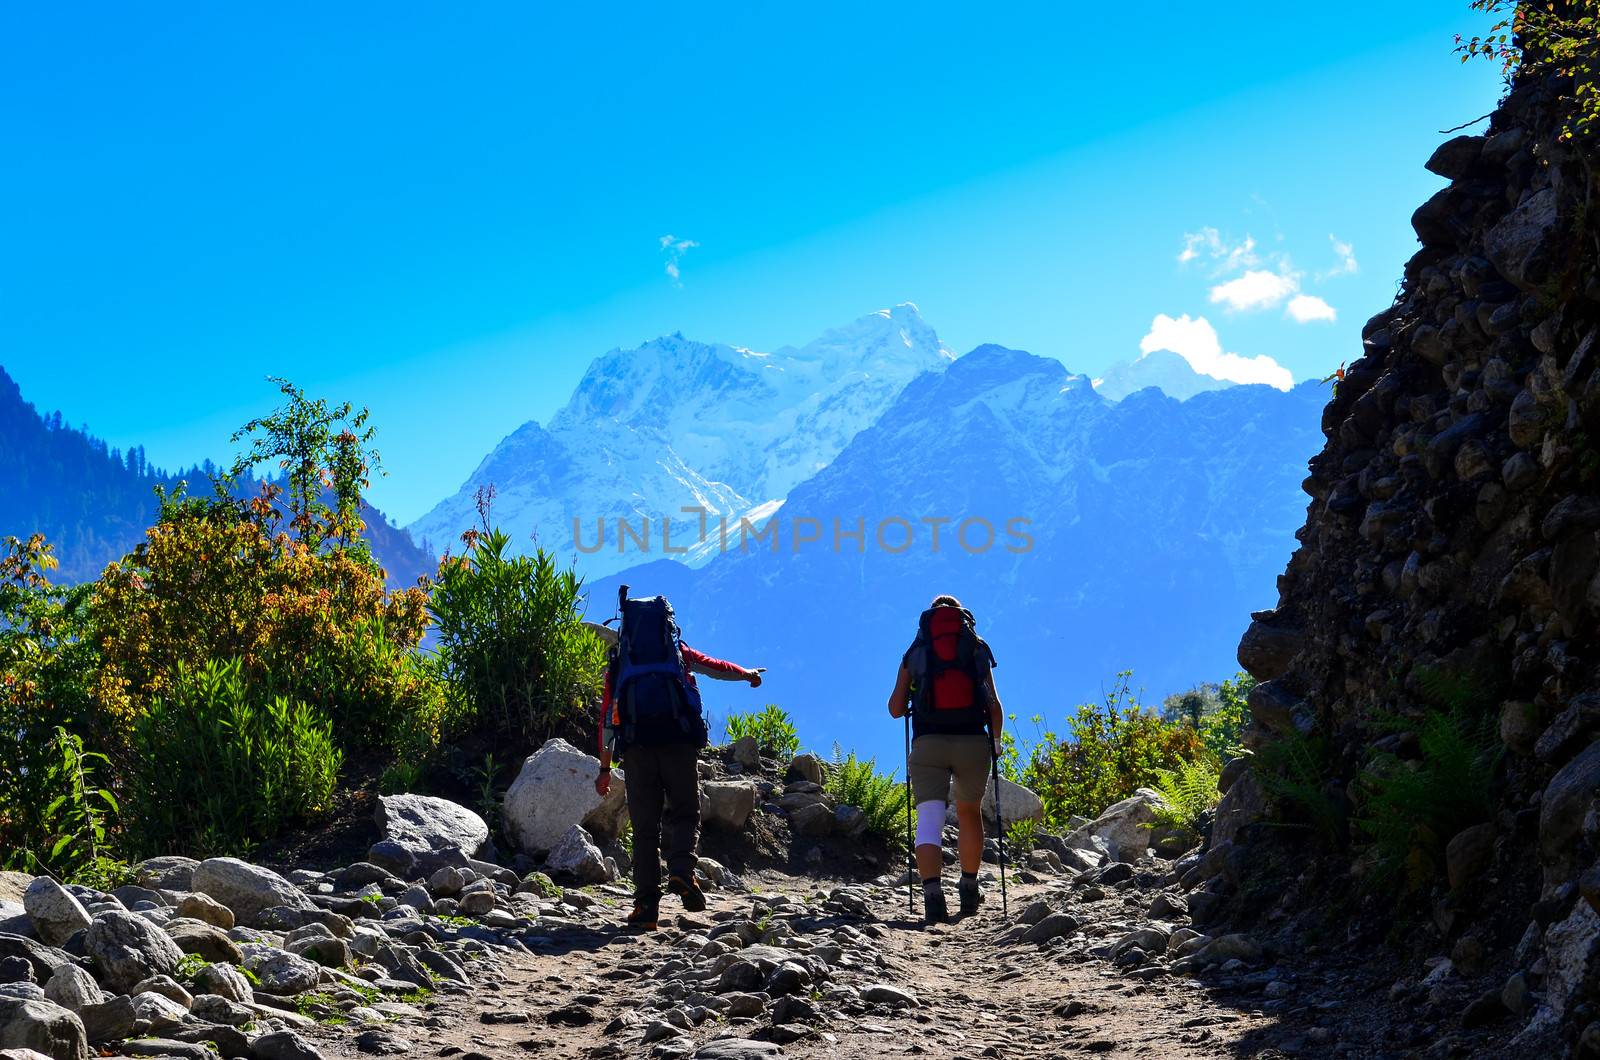 Two people trekking in the mountains with Himalayas in background, Nepal